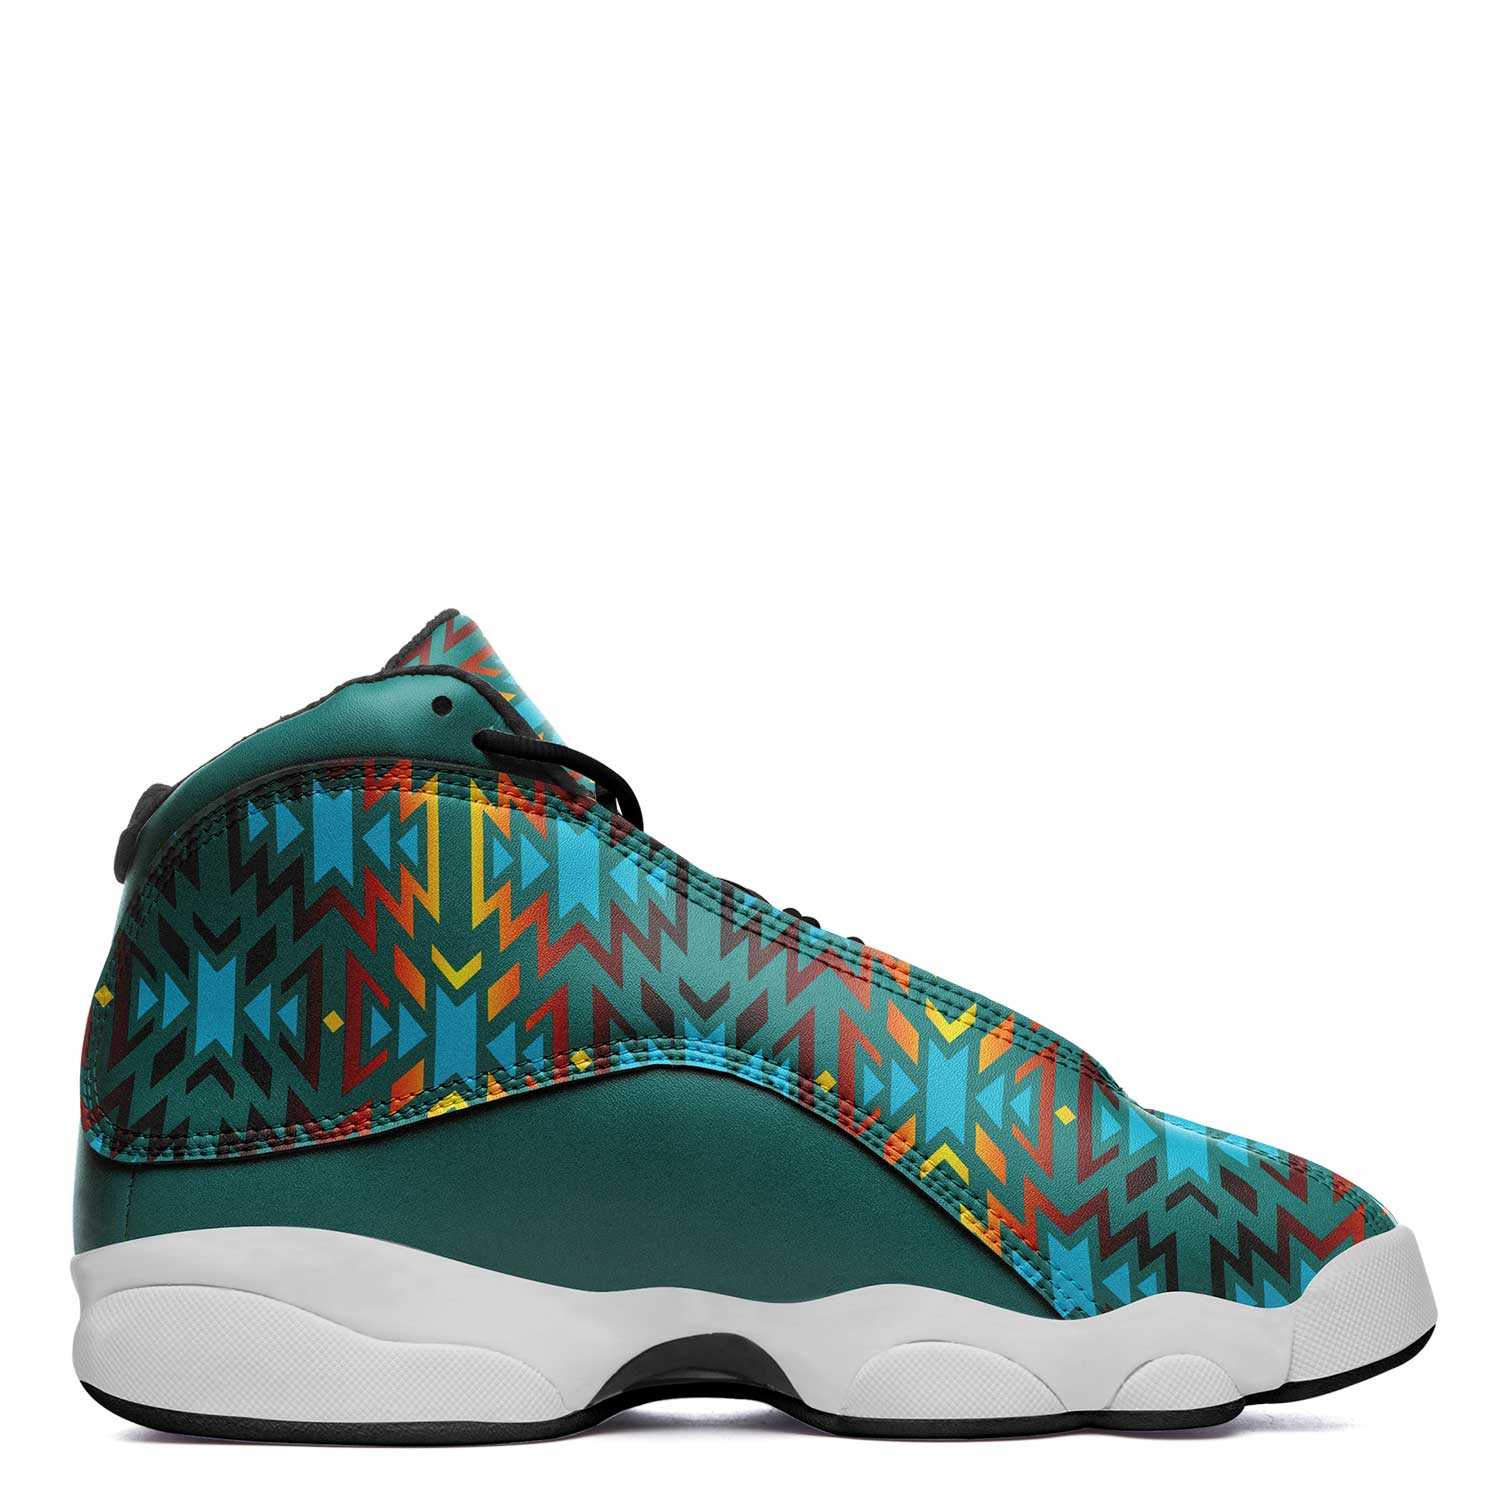 Fire Colors and Turquoise Teal Athletic Shoes Herman 